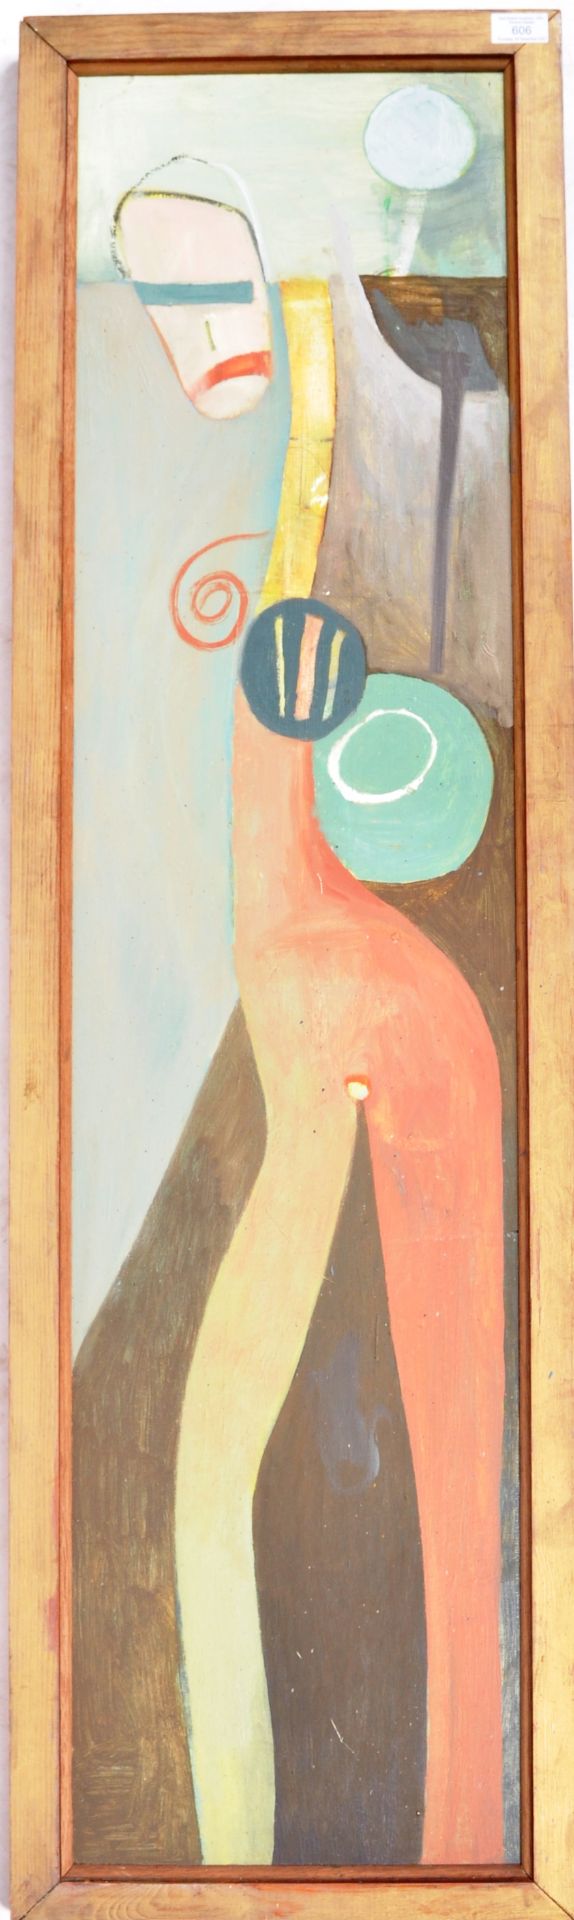 20TH CENTURY OIL ON BOARD ABSTRACT FIGURE PAINTING - Image 6 of 8